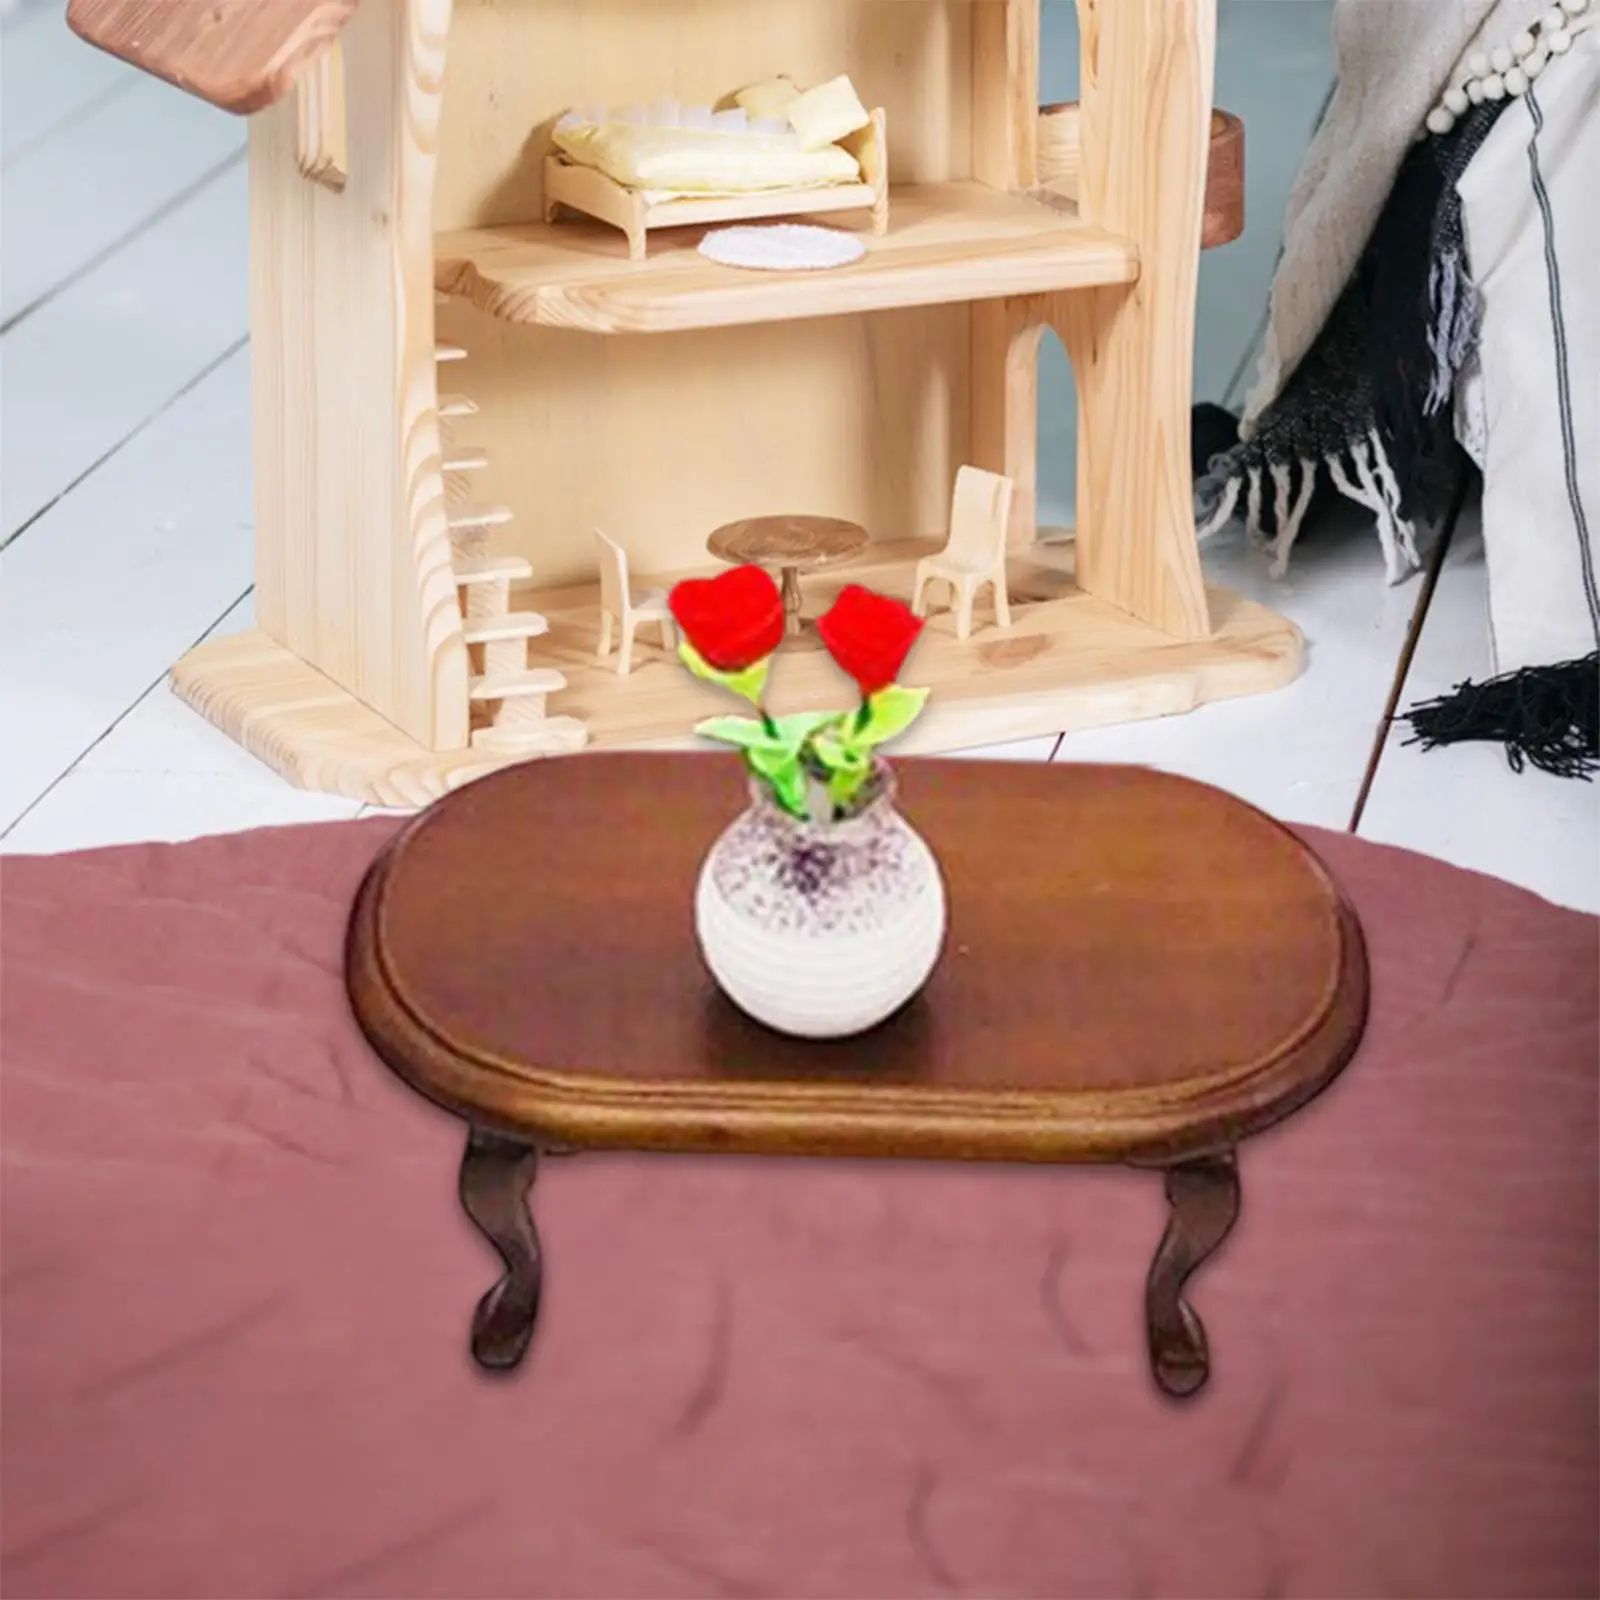 Mini Wooden Tea Table Simulated Wooden Tea Table Model for Room Supplies Crafts Furnishings